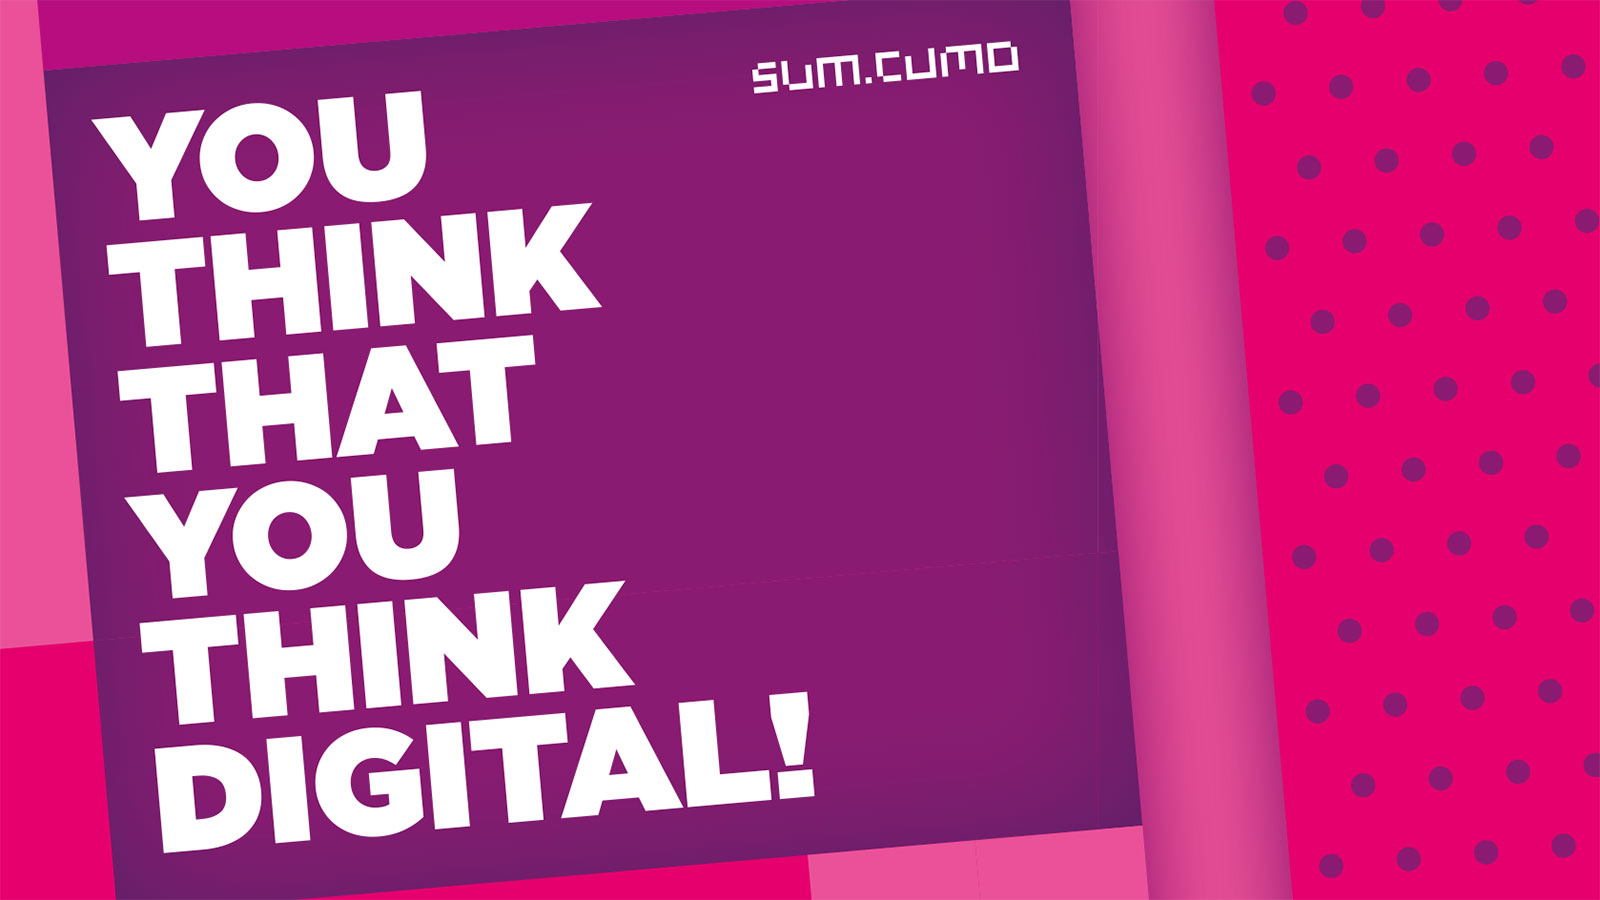 You think that you think digital!